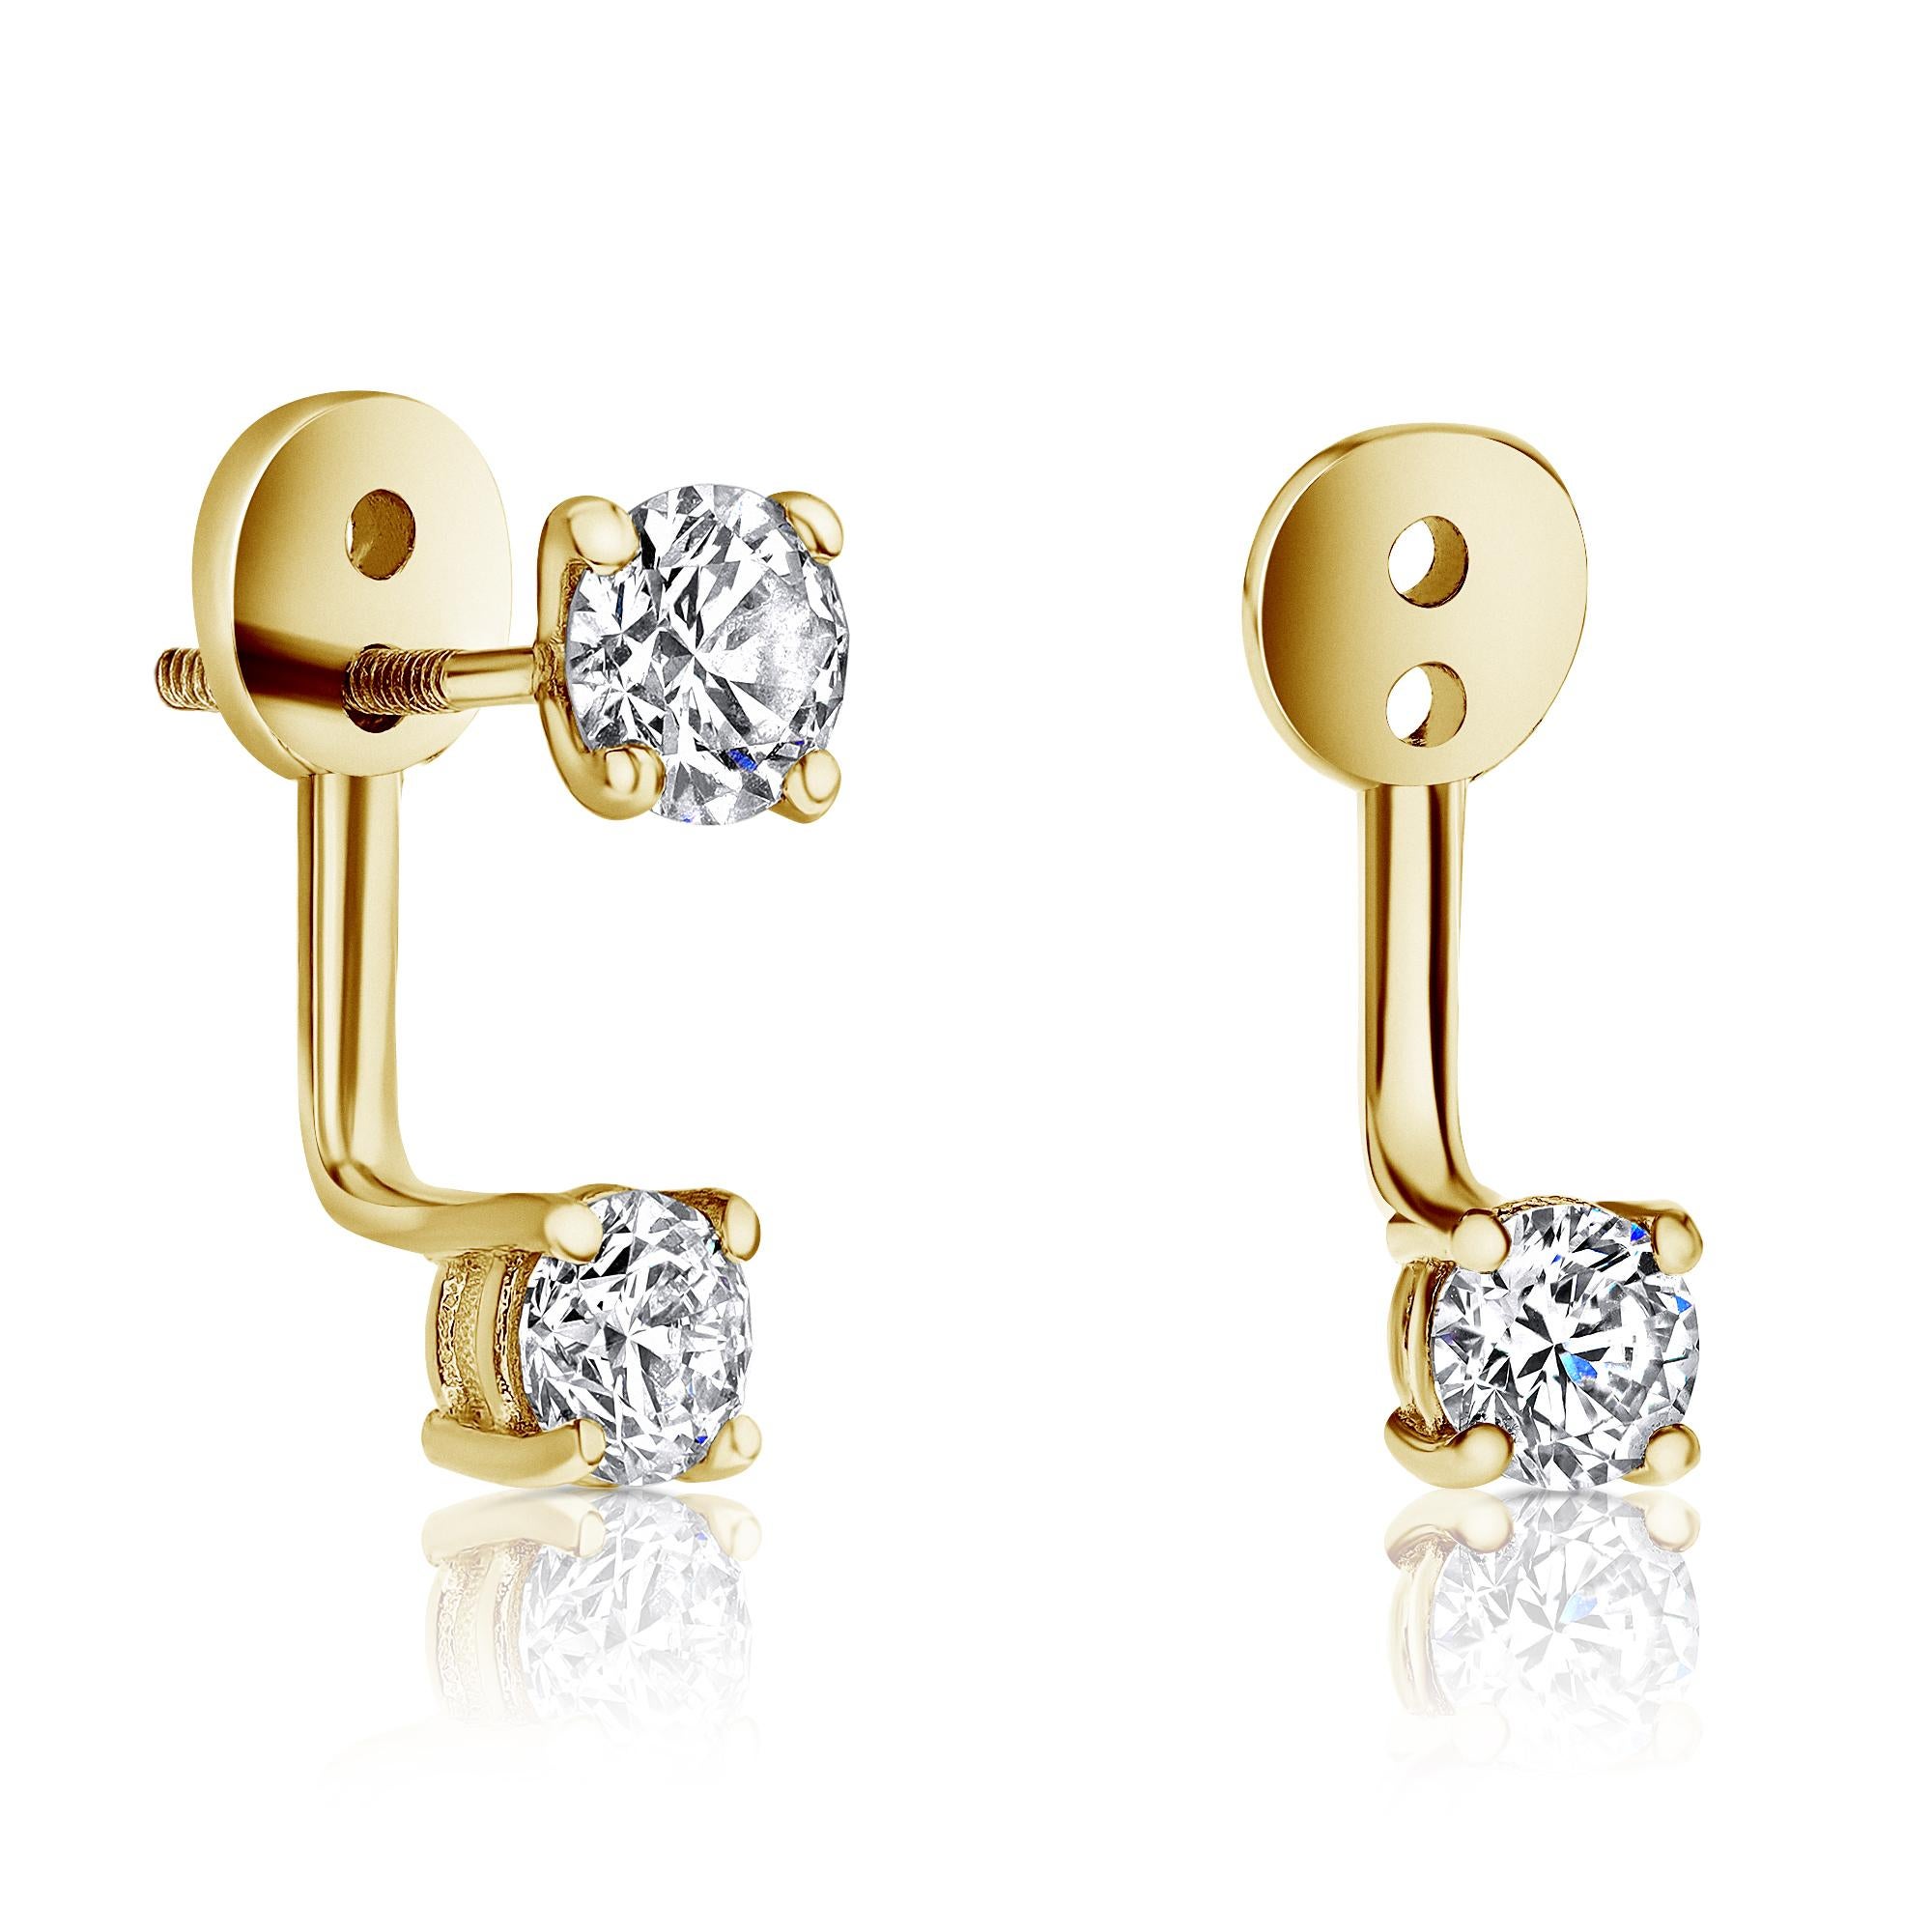 0.72 Carat Diamond Earrings Ear Jackets in 14 Karat Yellow Gold - Shlomit Rogel

These beautiful diamond set is a part of Shlomit Rogel's Cupid's Kiss Collection.
Classic diamond studs are attached to a diamond ear jacket set with 0.36 carat